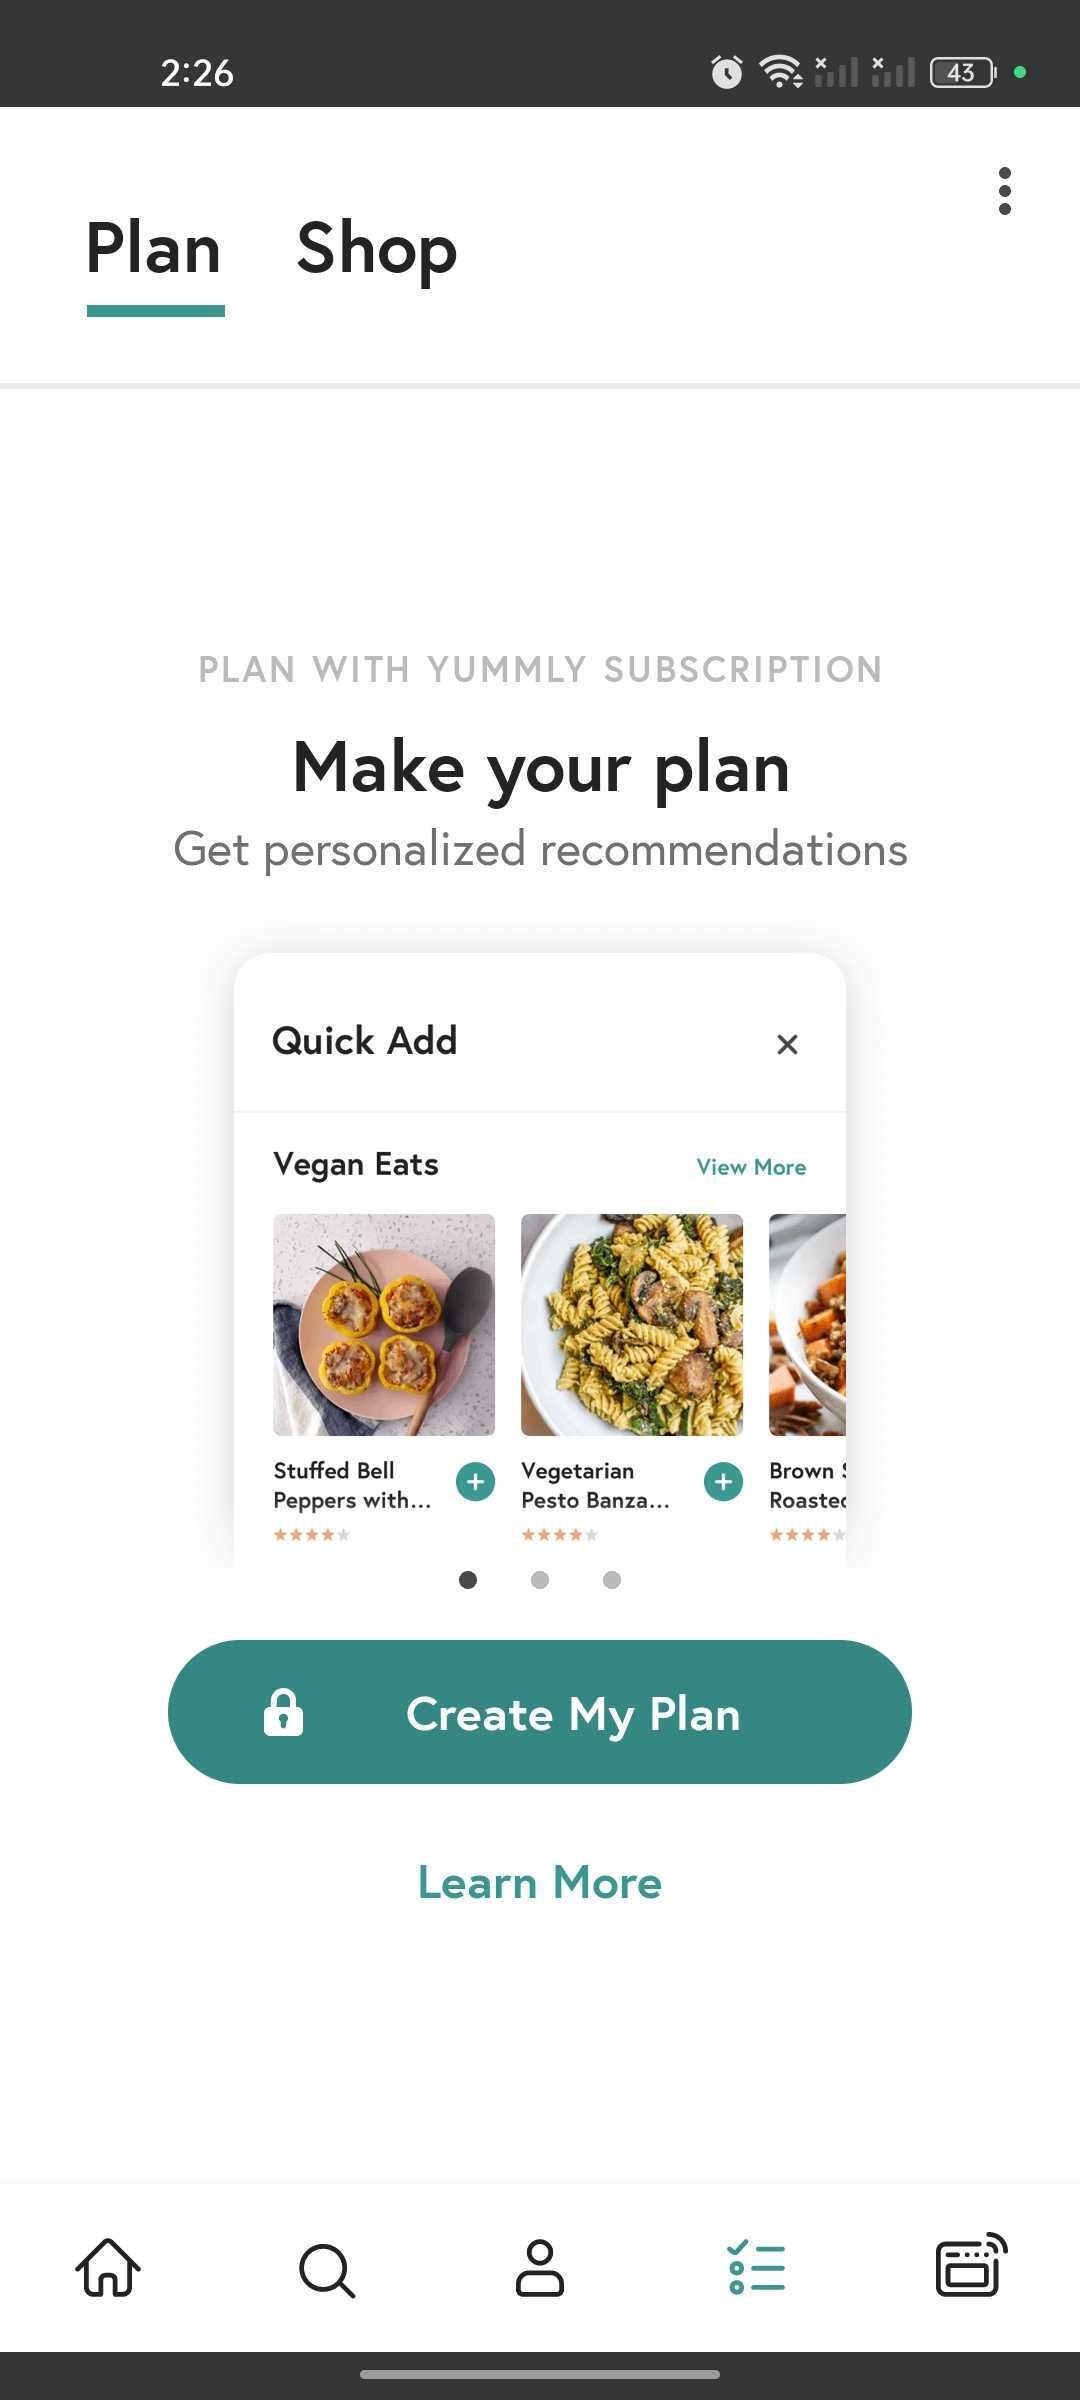 Meal plans in the Yummly app